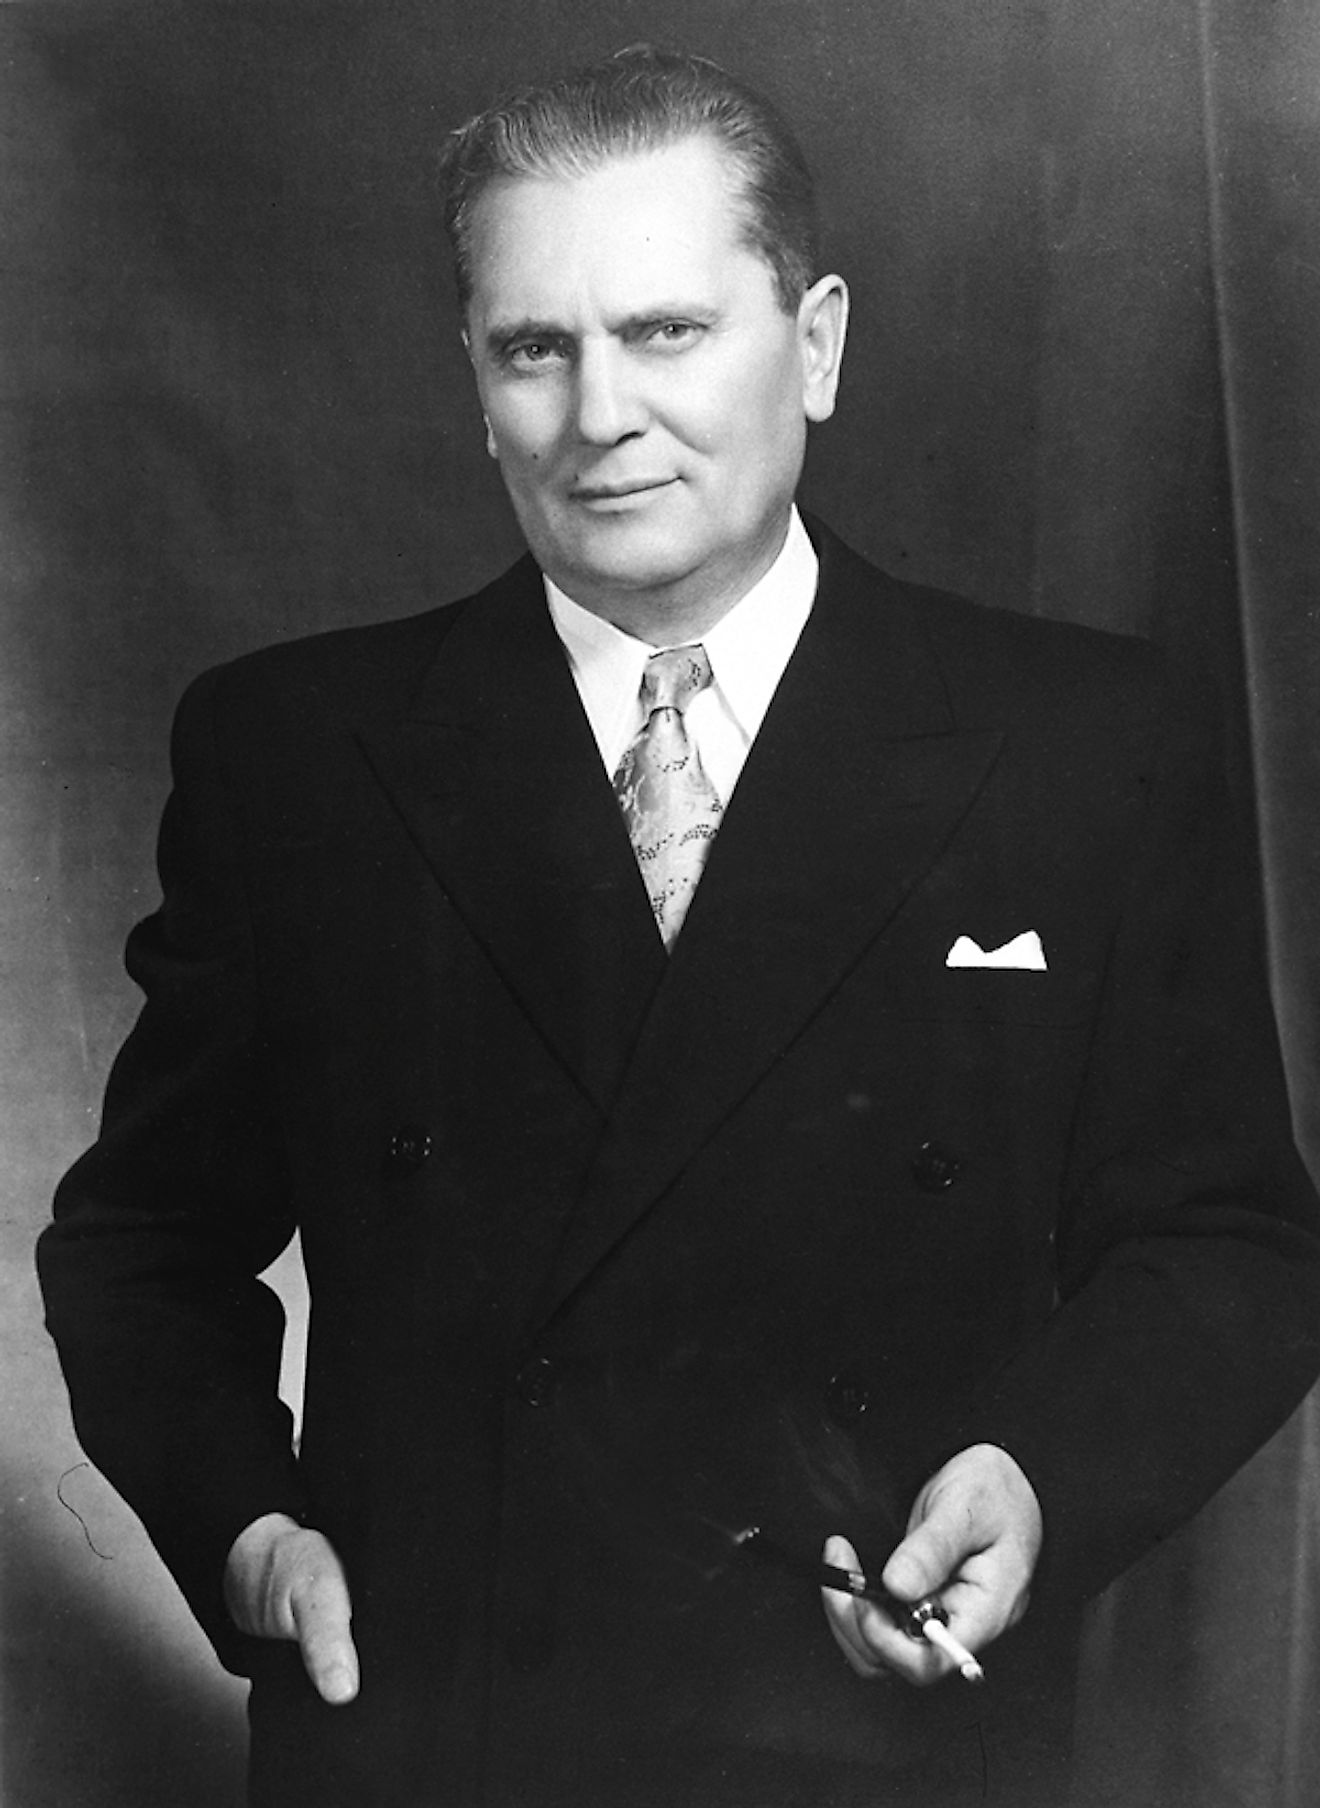 Marshal Tito, the President of the Federal People’s Republic of Yugoslavia, who came to India on December 16, 1954. Image credit: Photo Division, Ministry of Information &amp; Broadcasting, Government of India/Public domain